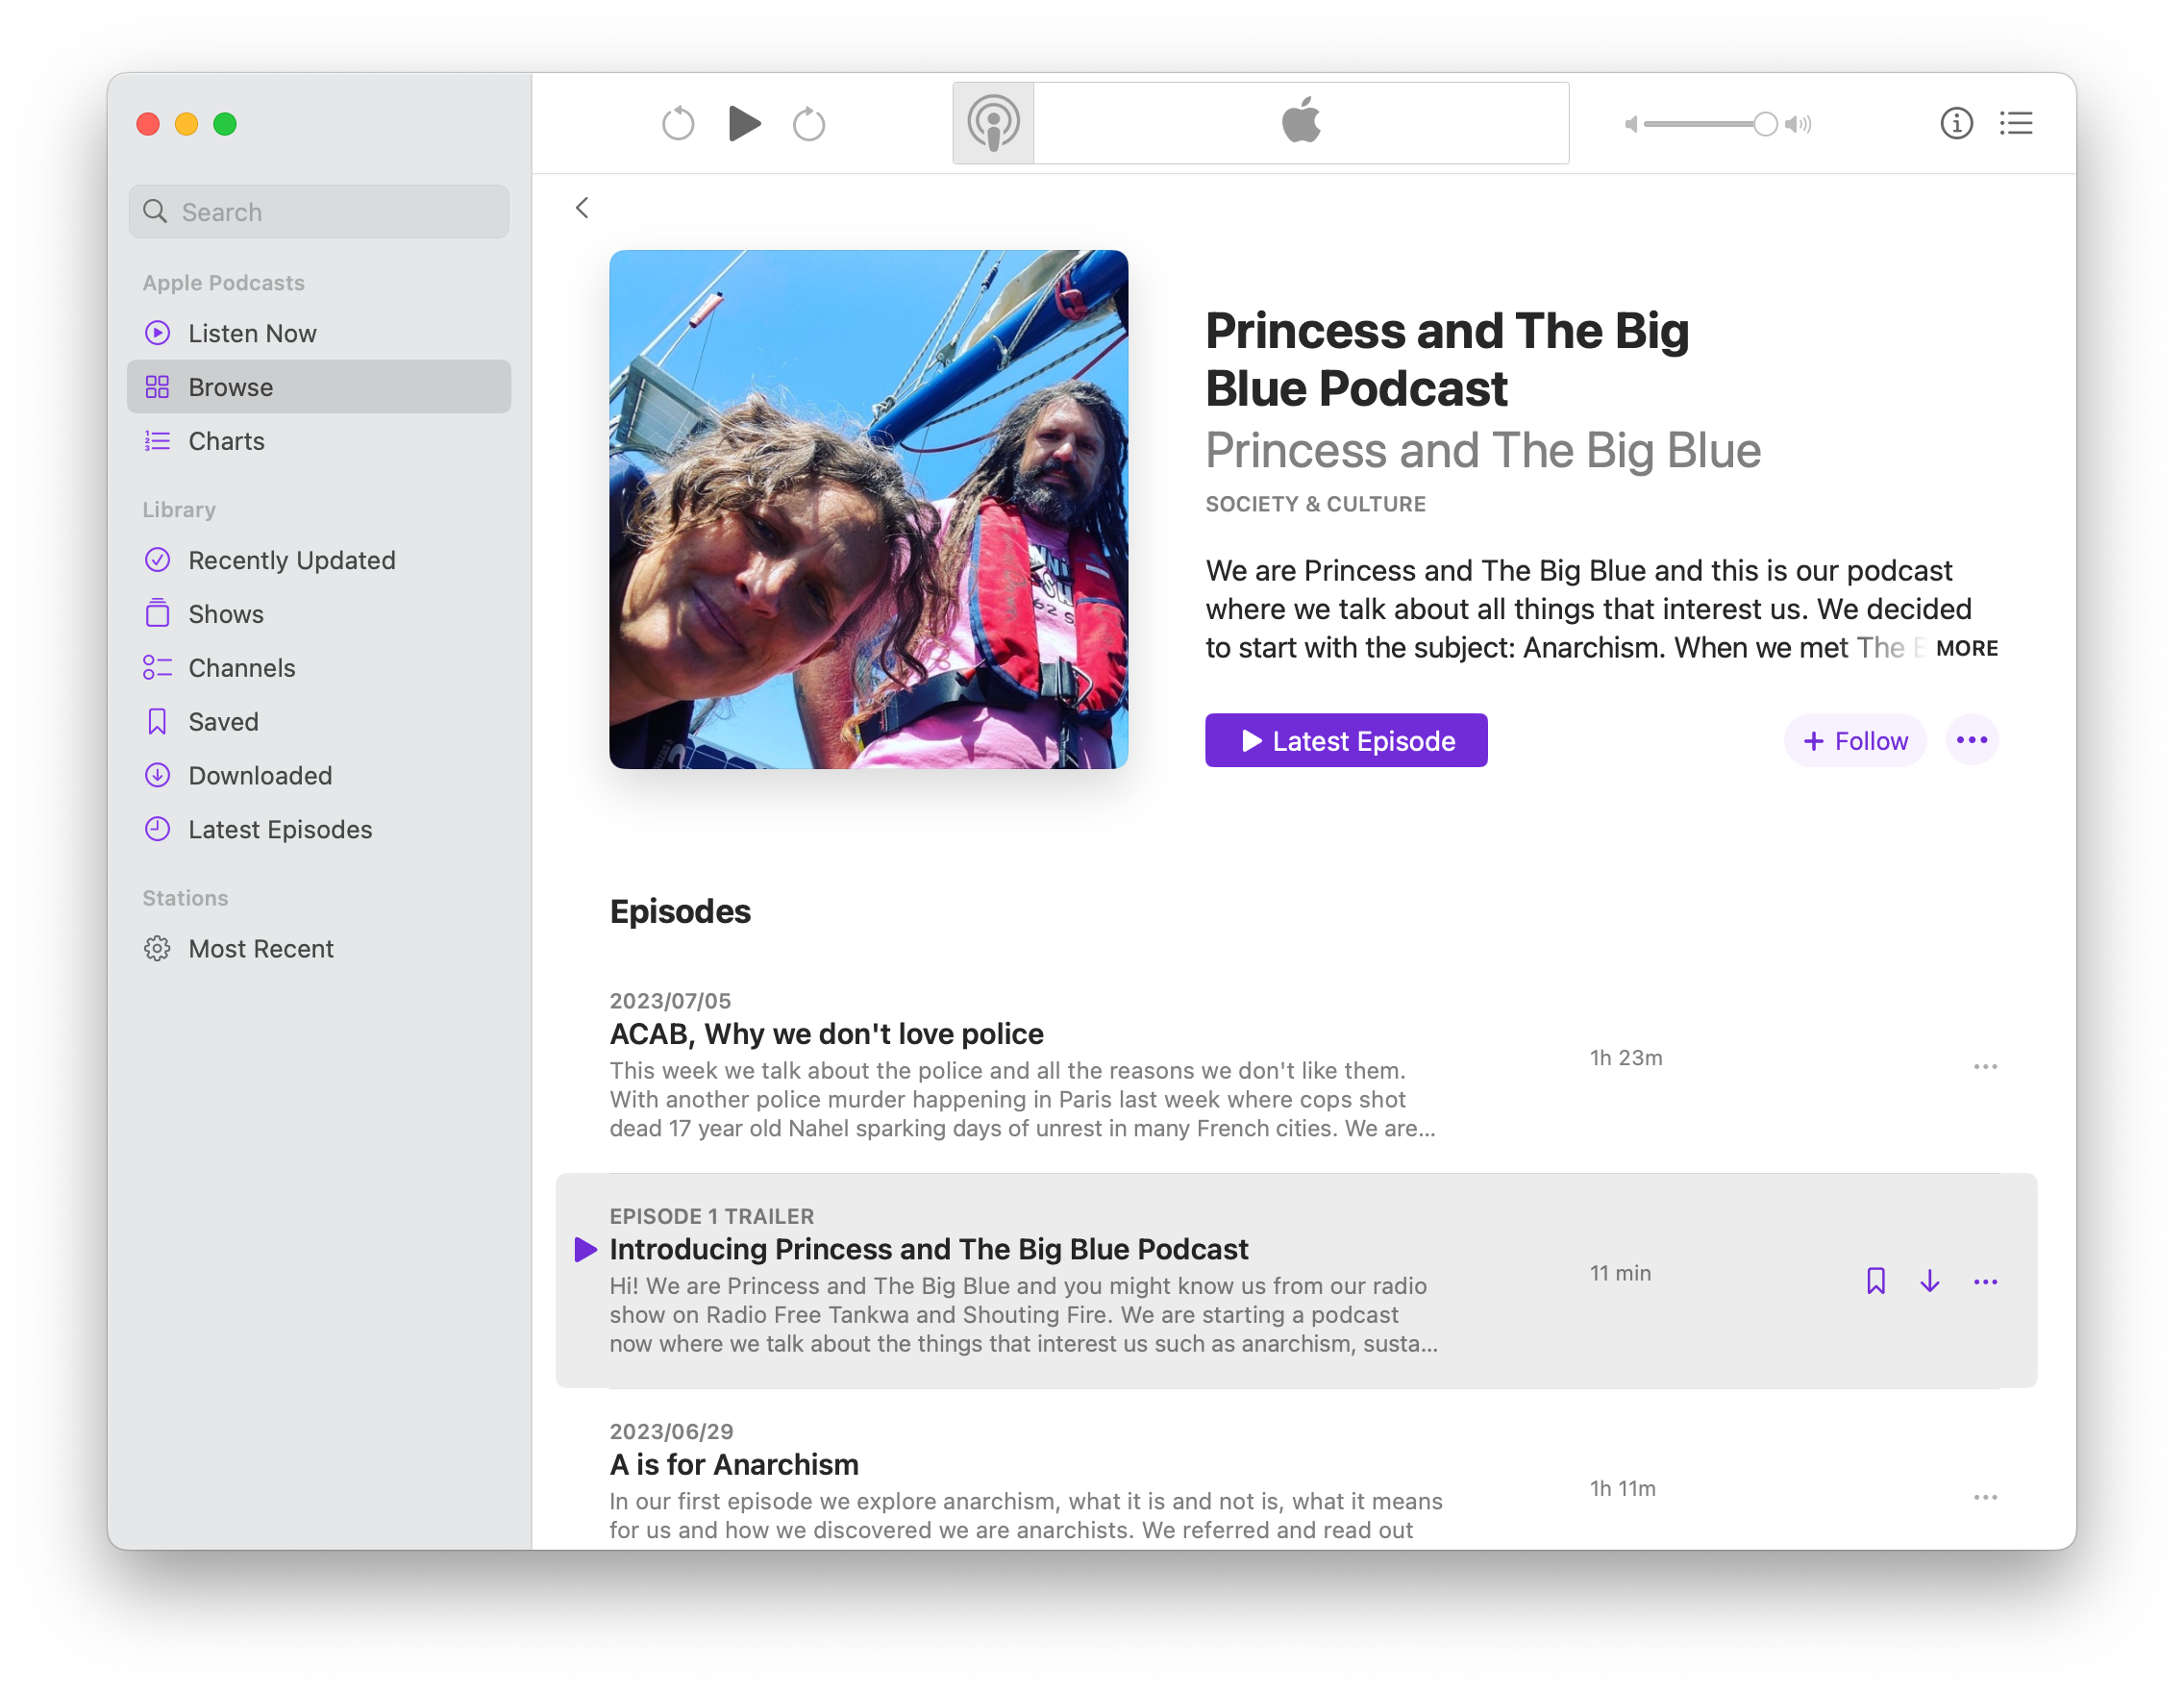 Princess and The Big Blue podcast on Apple Podcasts Screenshot